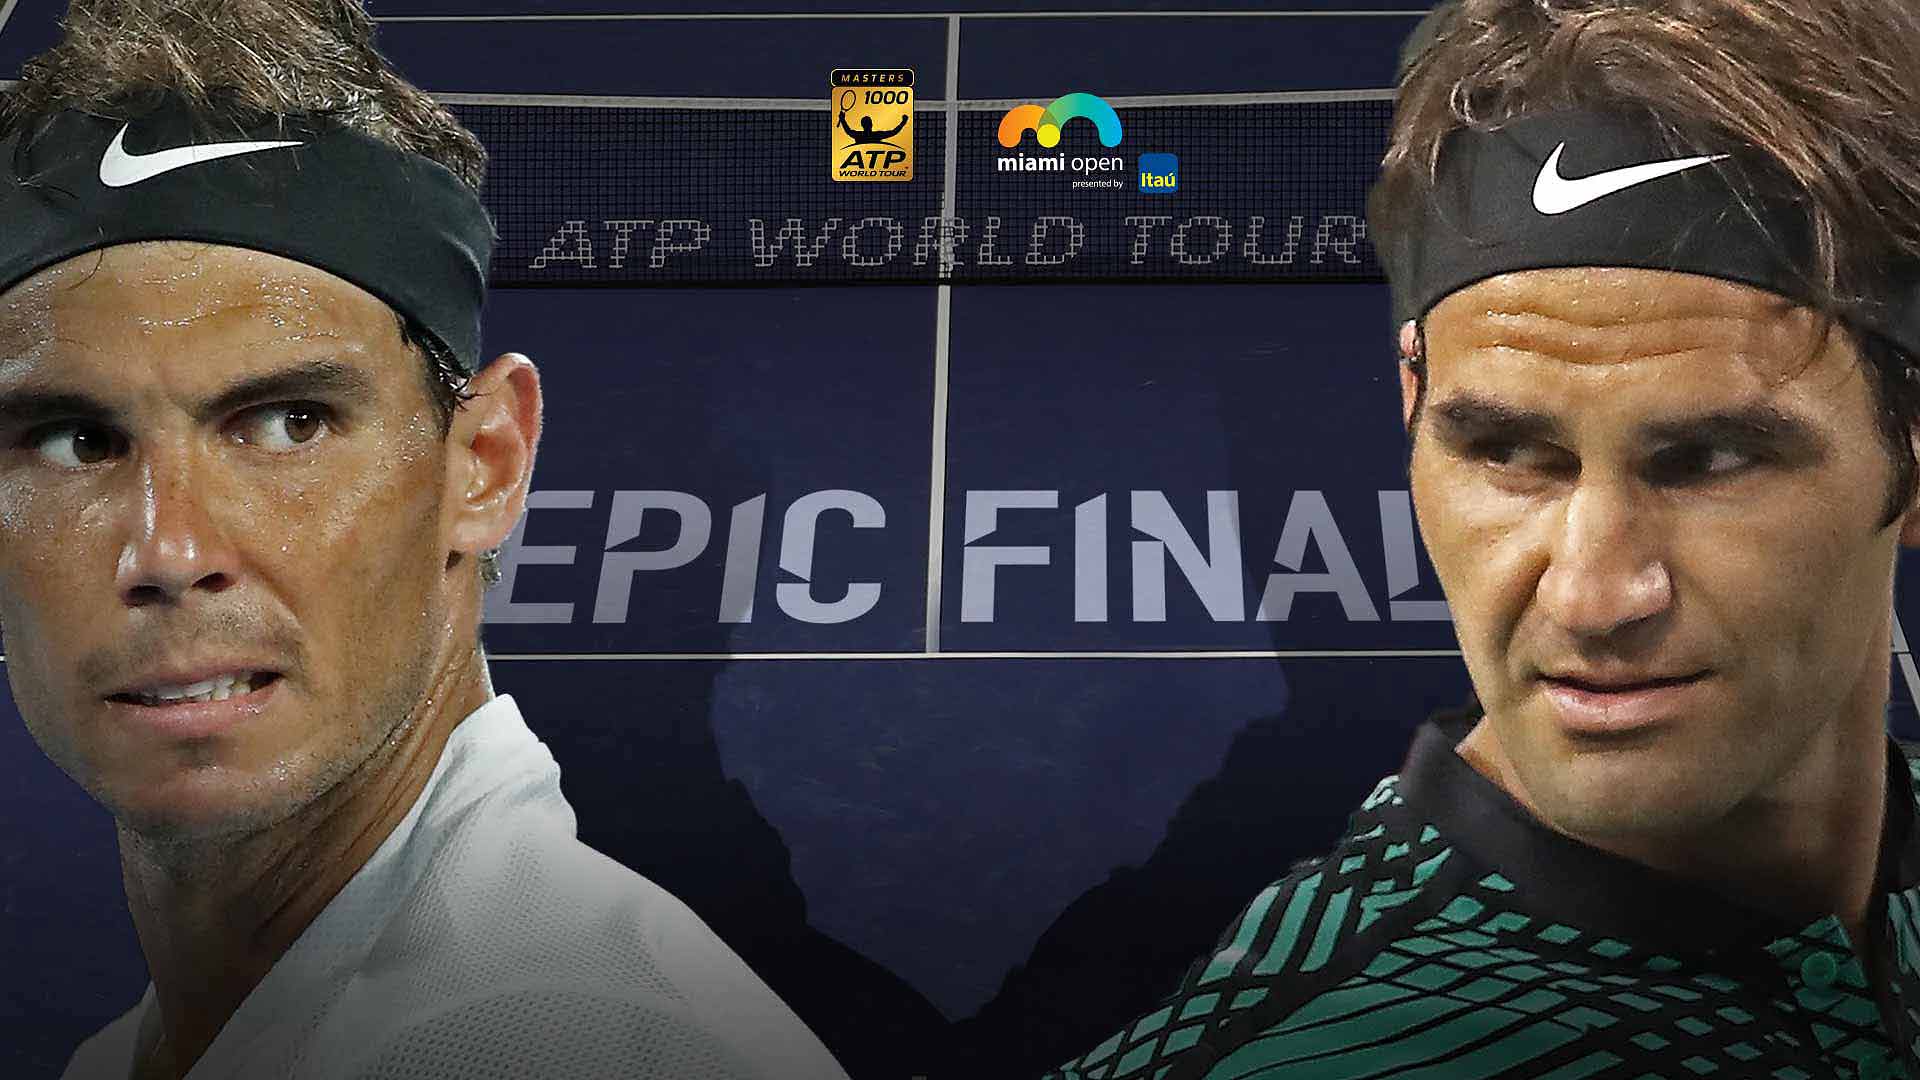 Rafael Nadal and Roger Federer will meet for the 37th time in the Miami Open final.